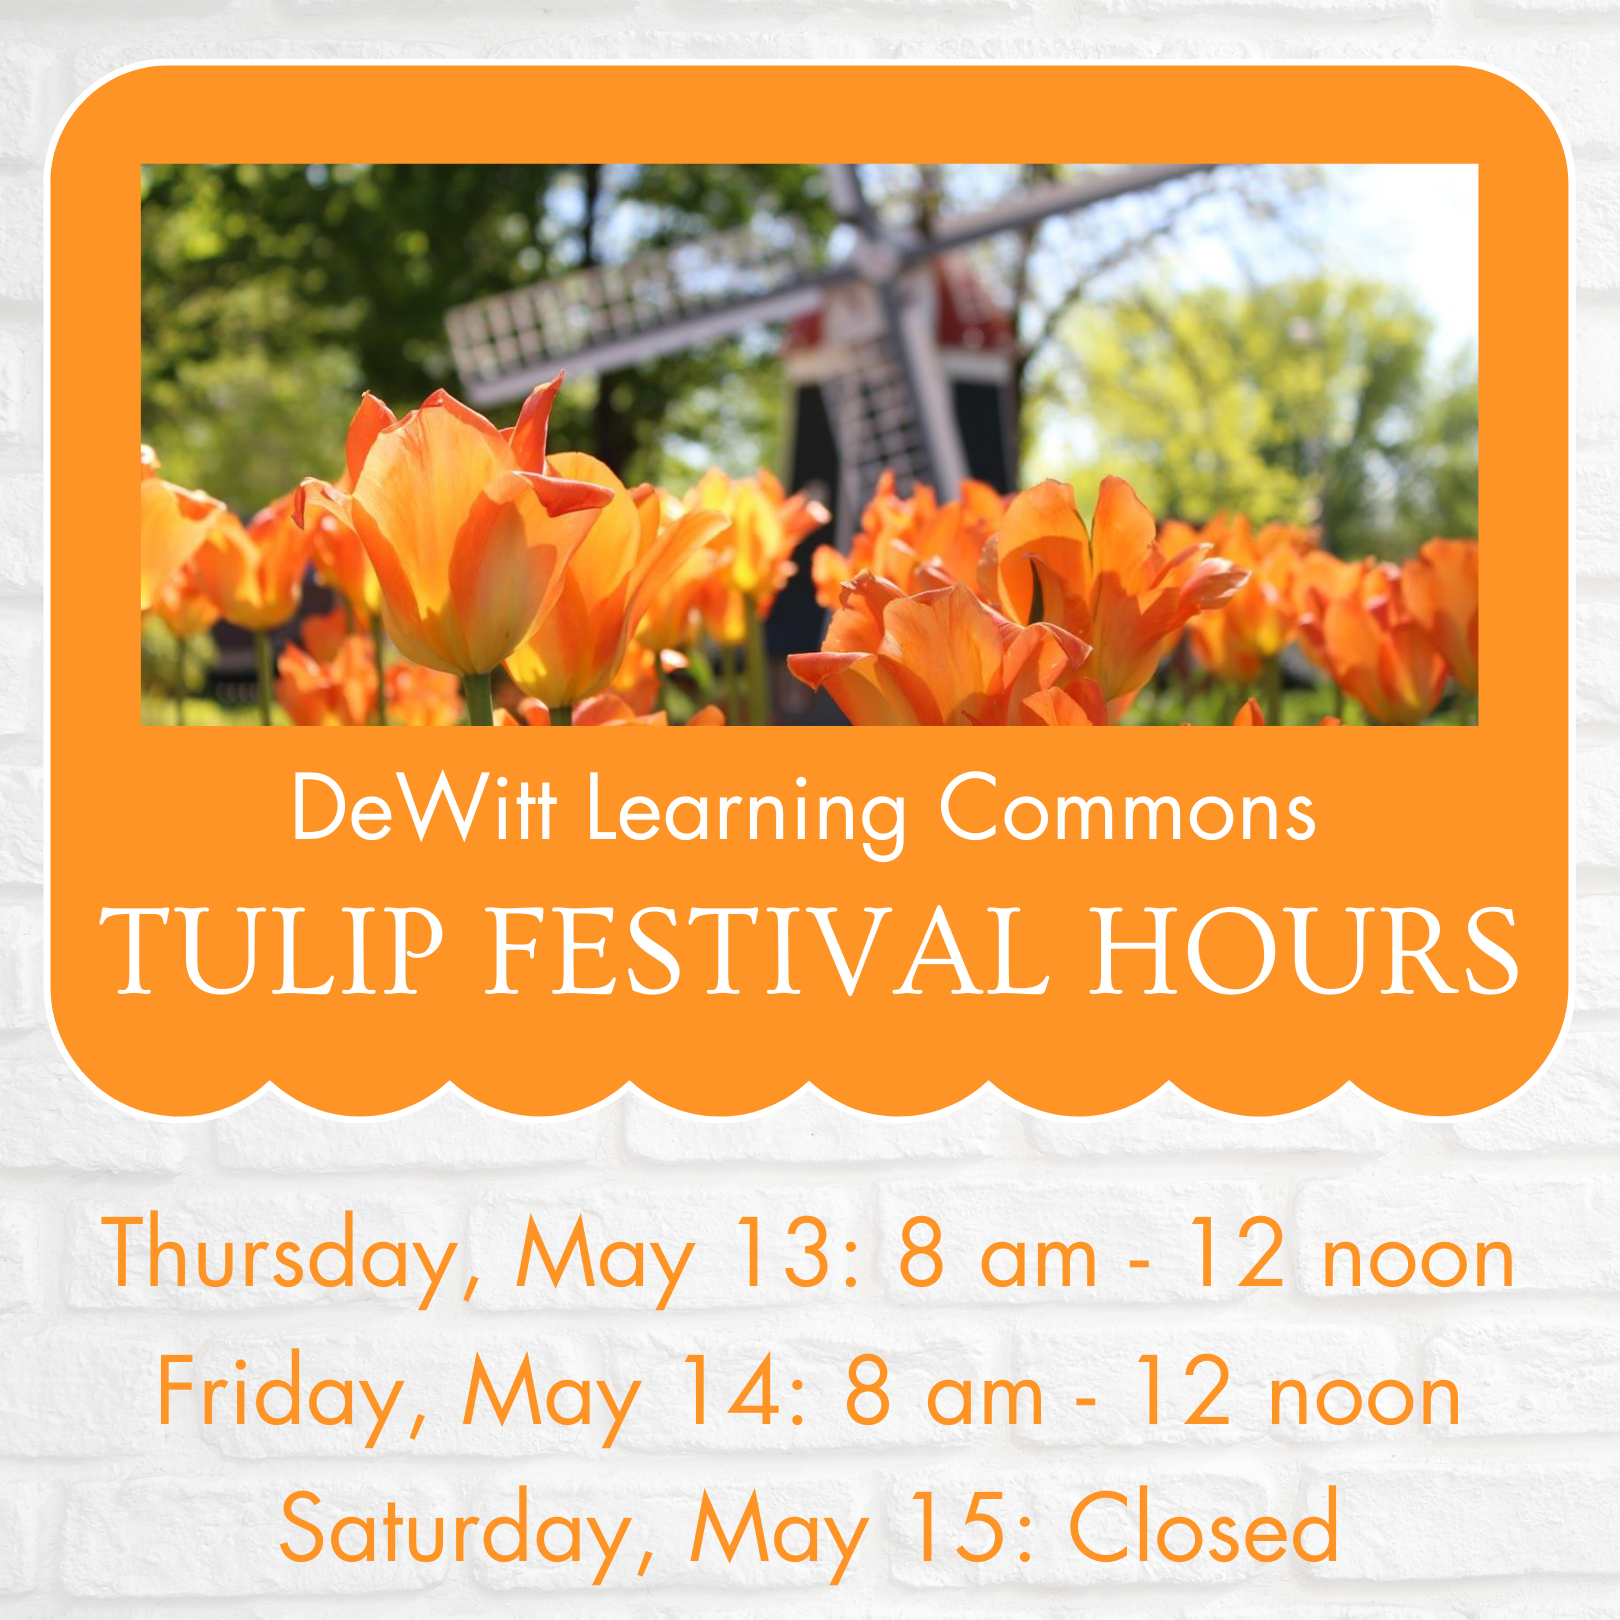 DeWitt Learning Commons Tulip Festival Hours: Thursday, May 13: 8 am - 12 noon; Friday, May 14: 8 am - 12 noon; Saturday, May 15: Closed